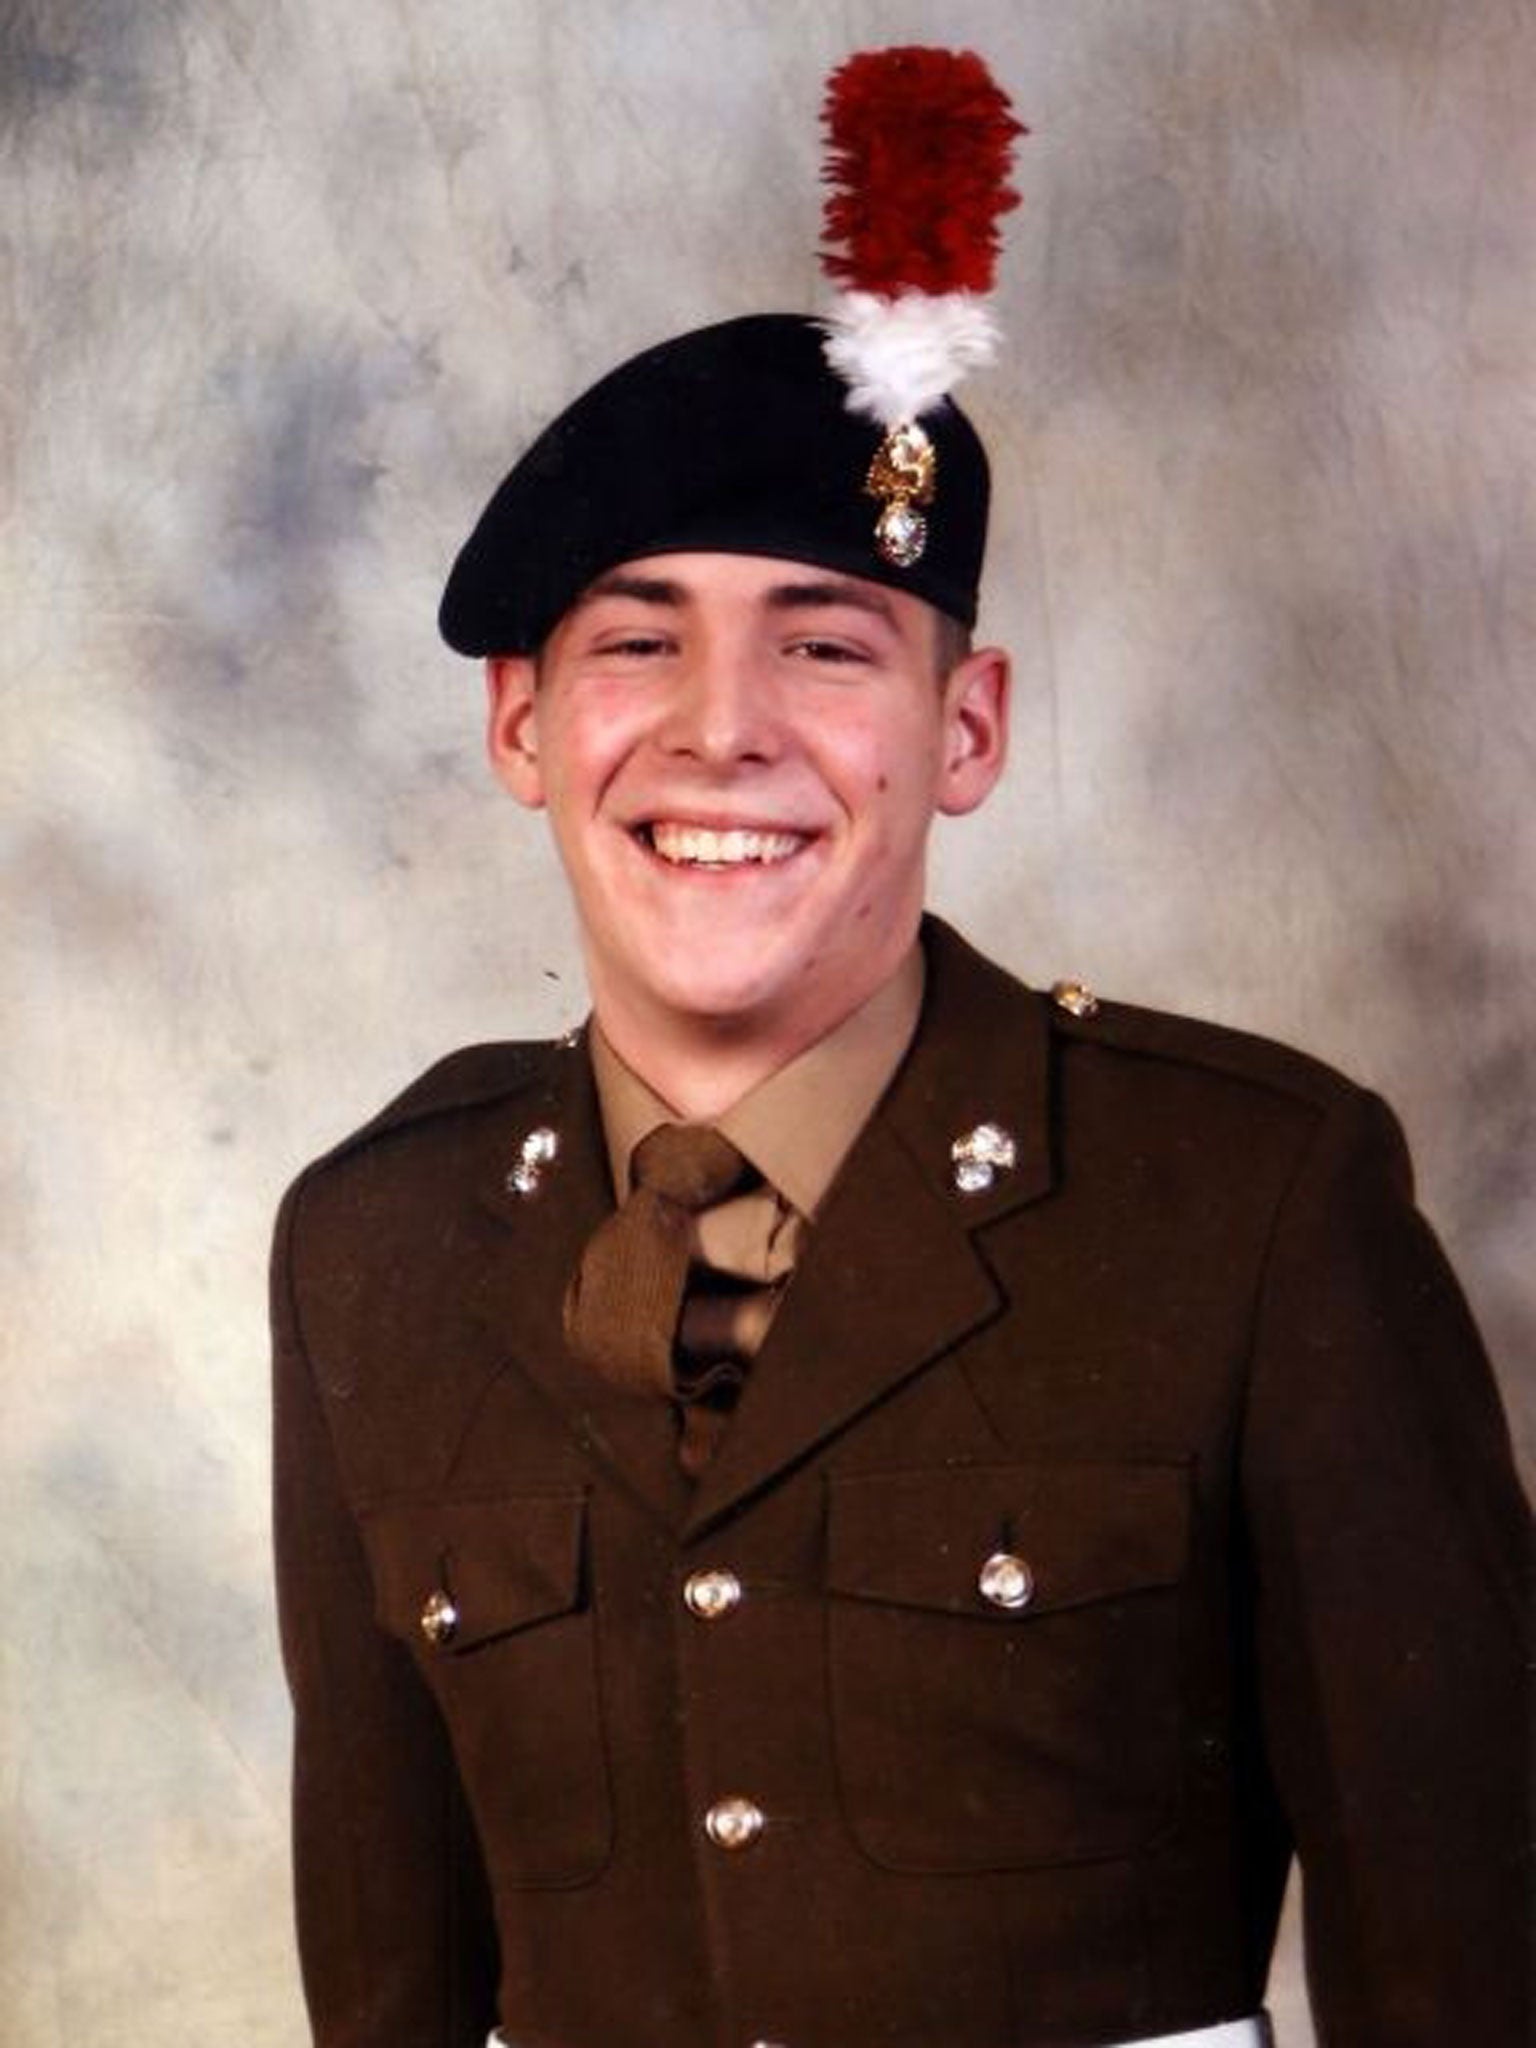 Fusilier Lee Rigby was attacked and killed in May last year